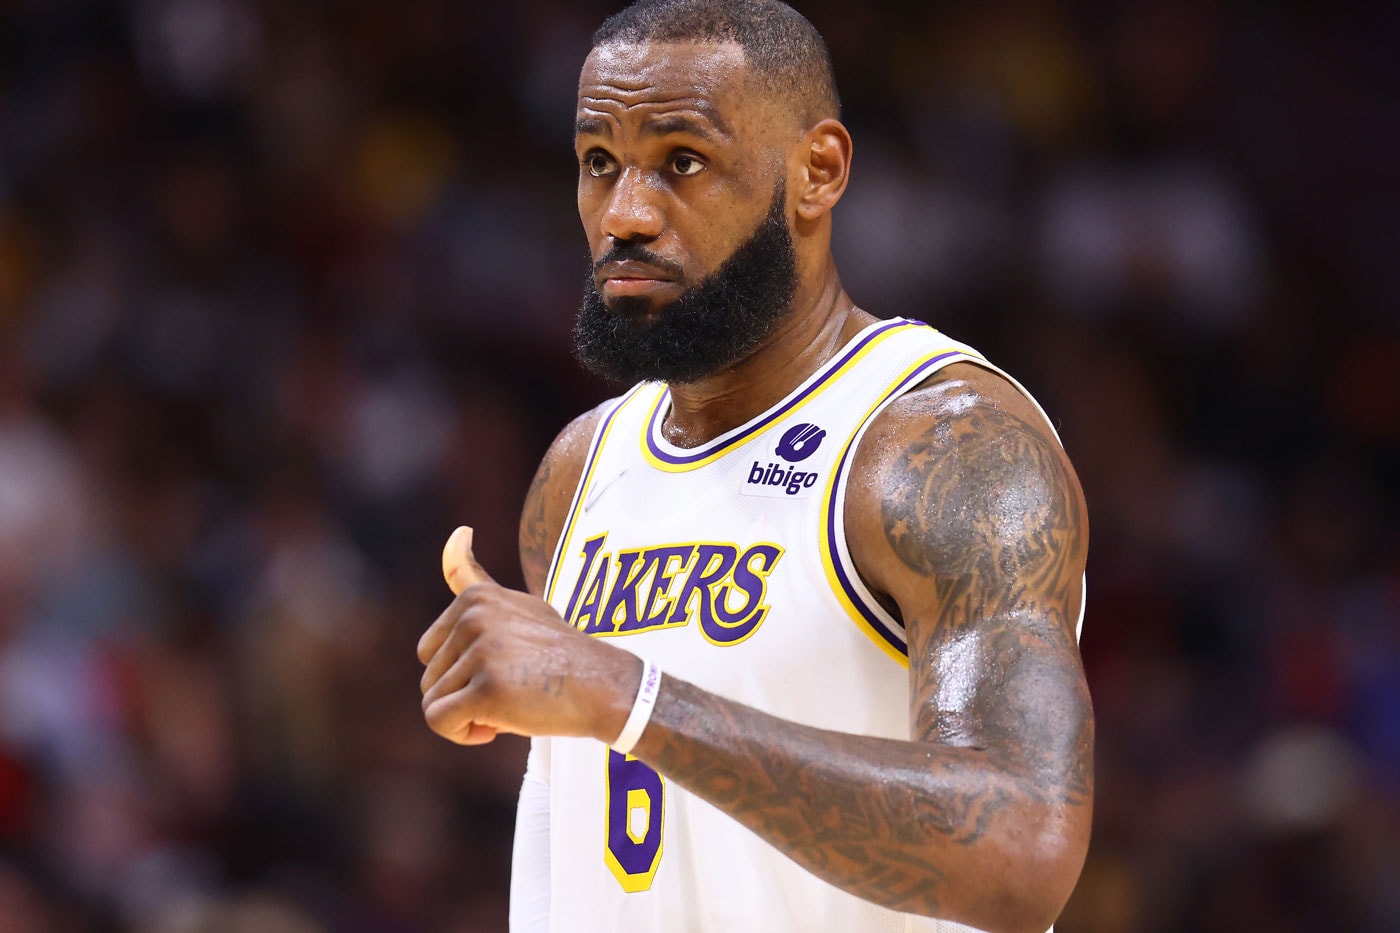 LeBron James Warns Against Giving up on the Lakers, "Until You Bury Me 12 Feet Under, I've Got a Chance" los angeles lakers nba basketball rusell westbrook luka doncic los angeles clippers 